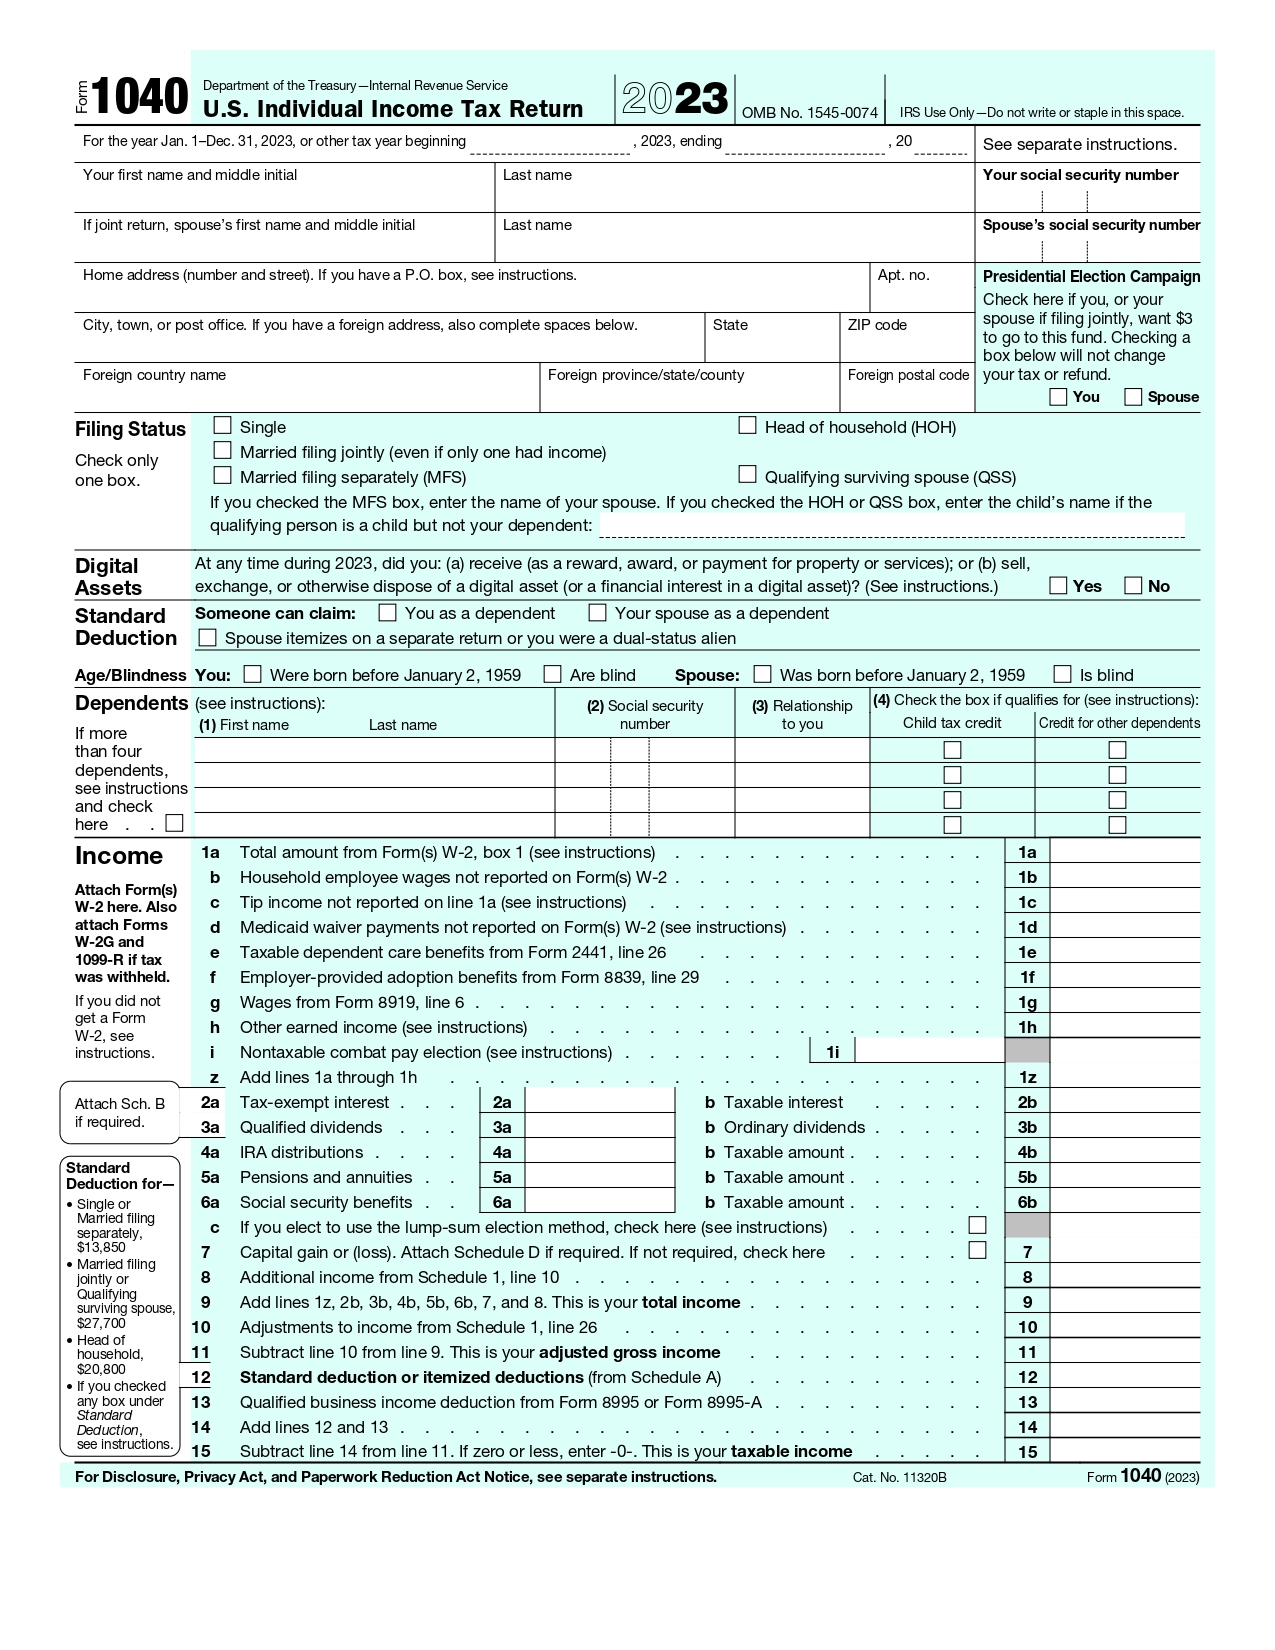 Income_Tax_1040_form_page-0001